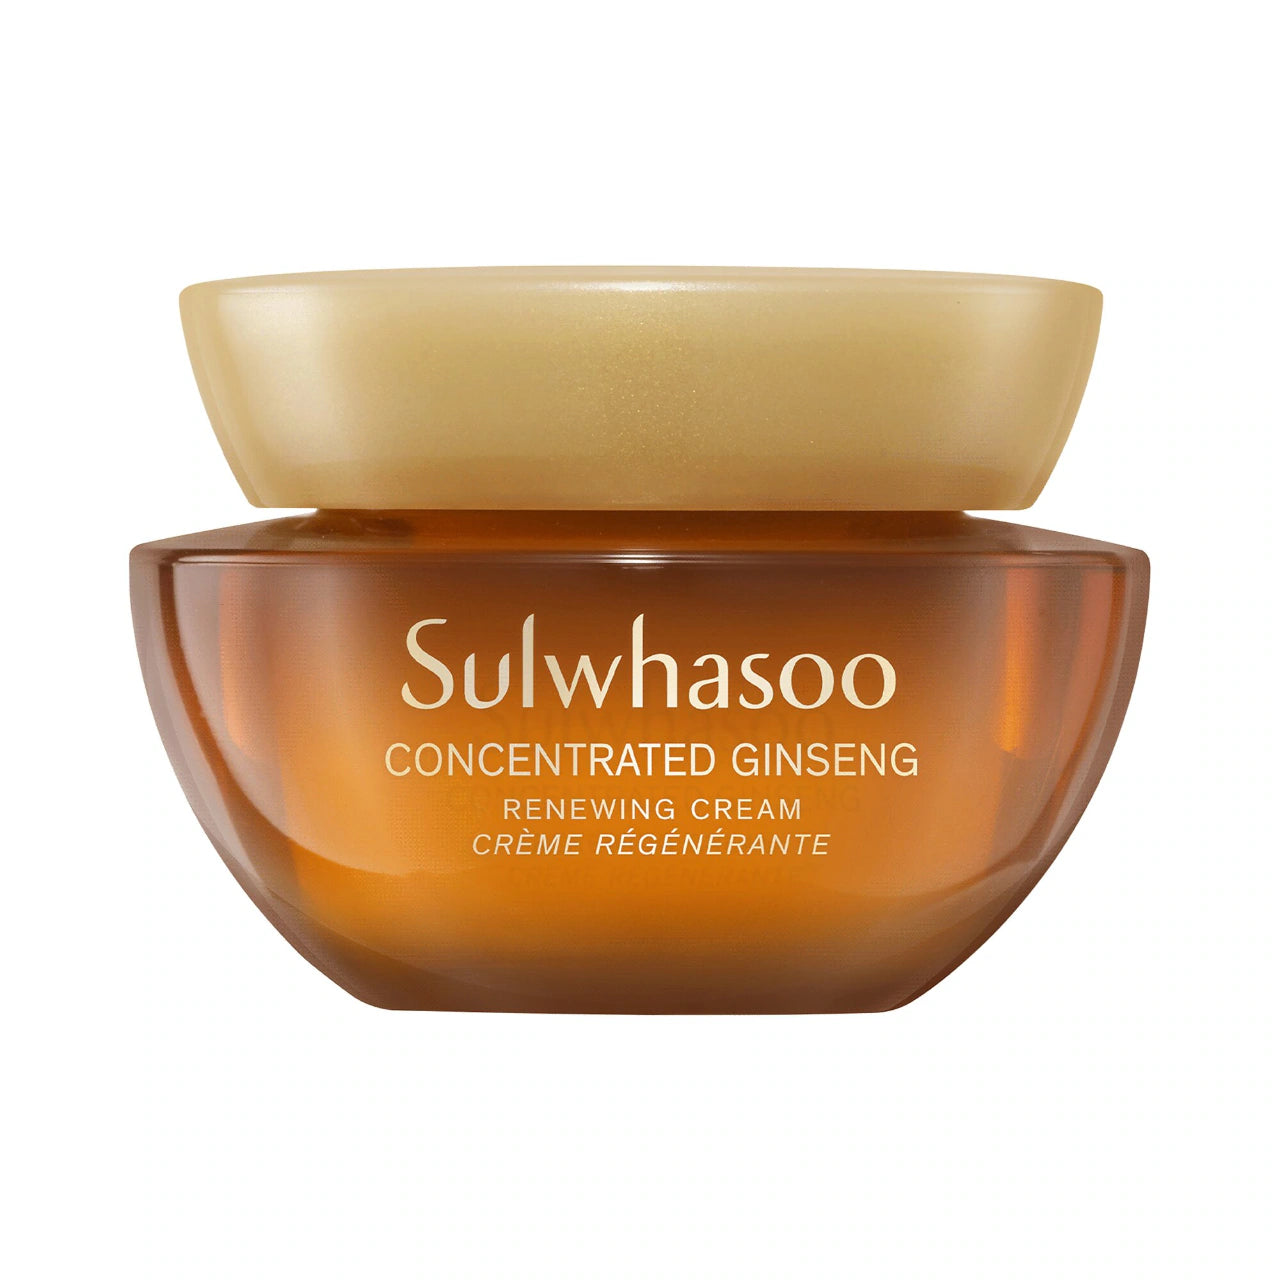 Concentrated Ginseng Renewing Cream Trial Size - 5 ml